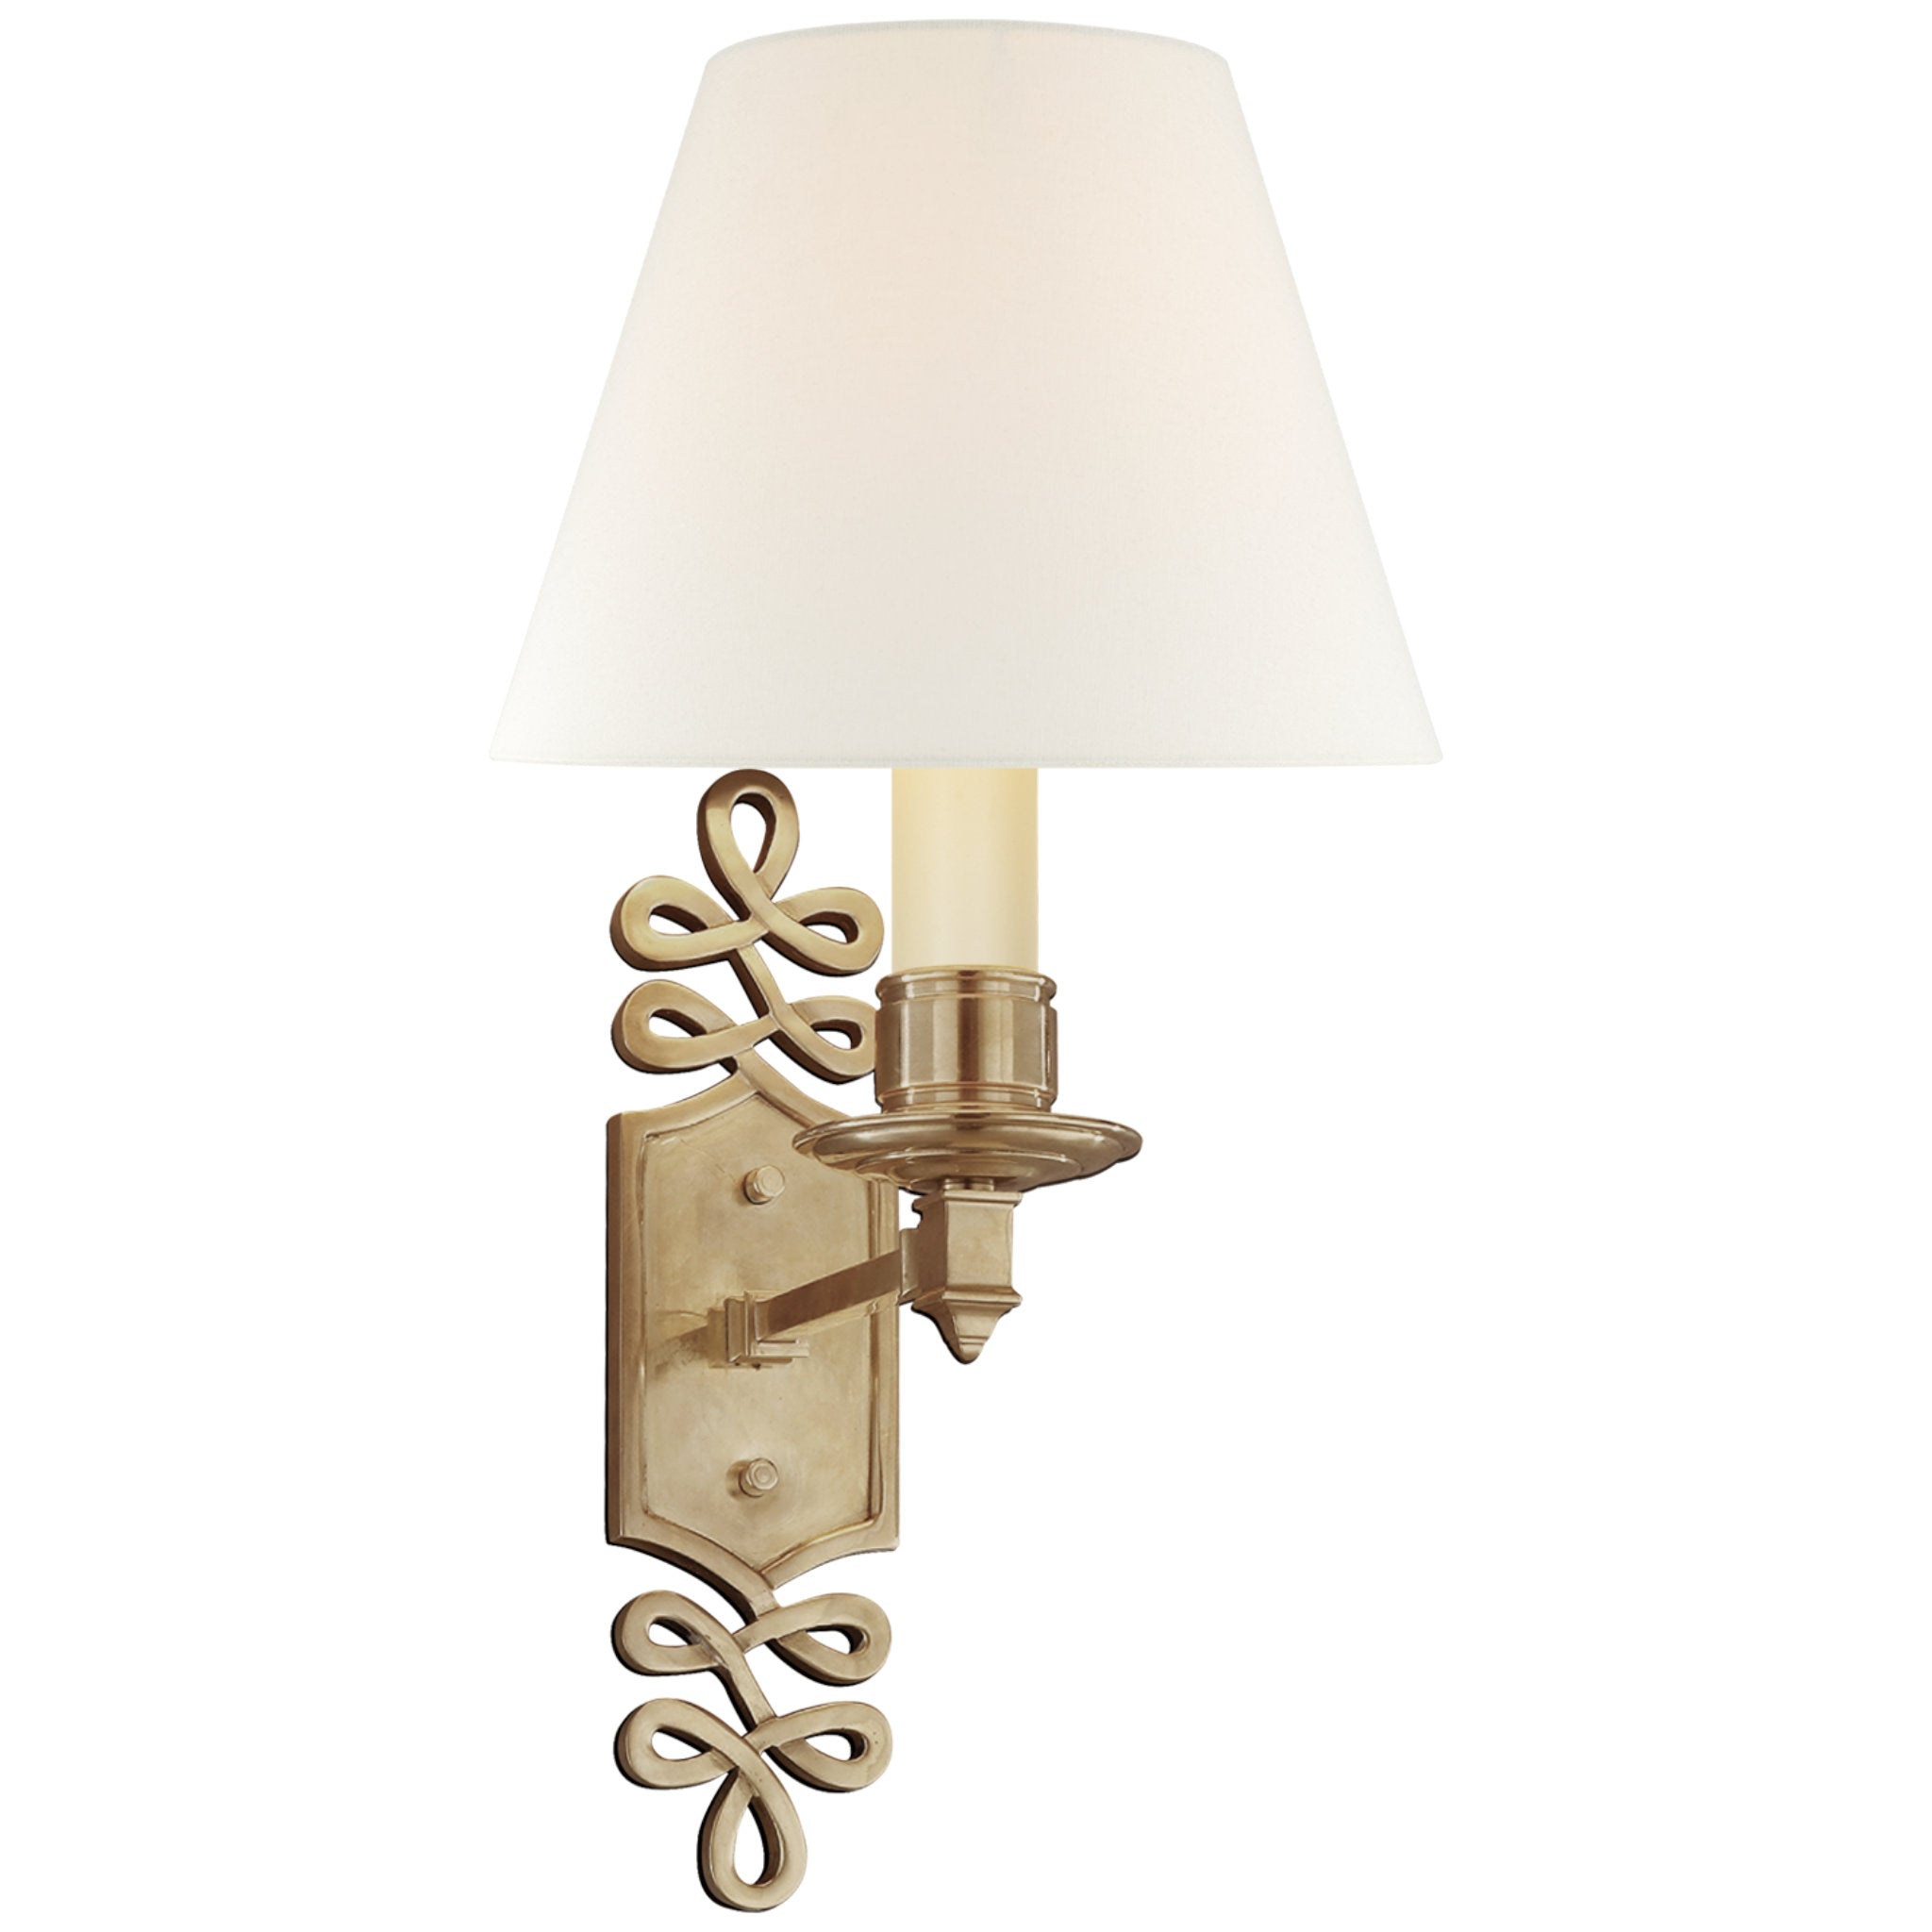 Alexa Hampton Ginger Single Arm Sconce in Natural Brass with Linen Shade